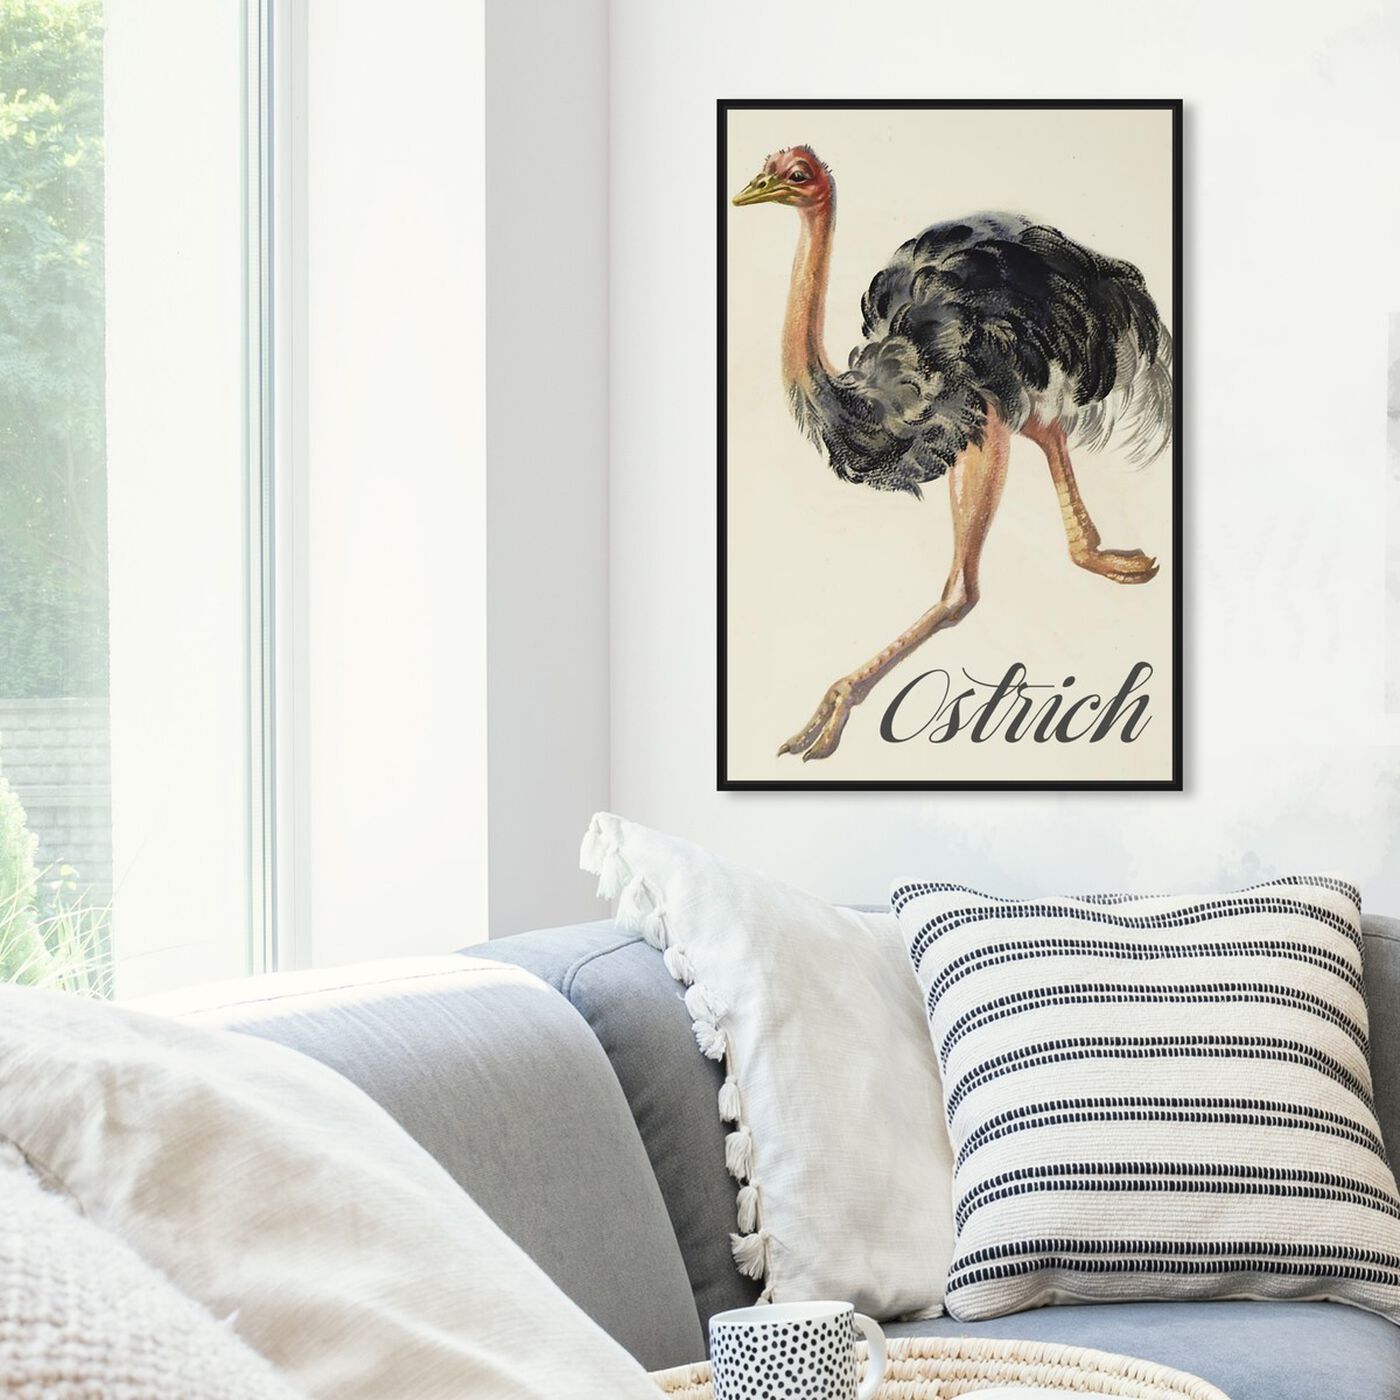 Hanging view of Ostrich featuring animals and birds art.